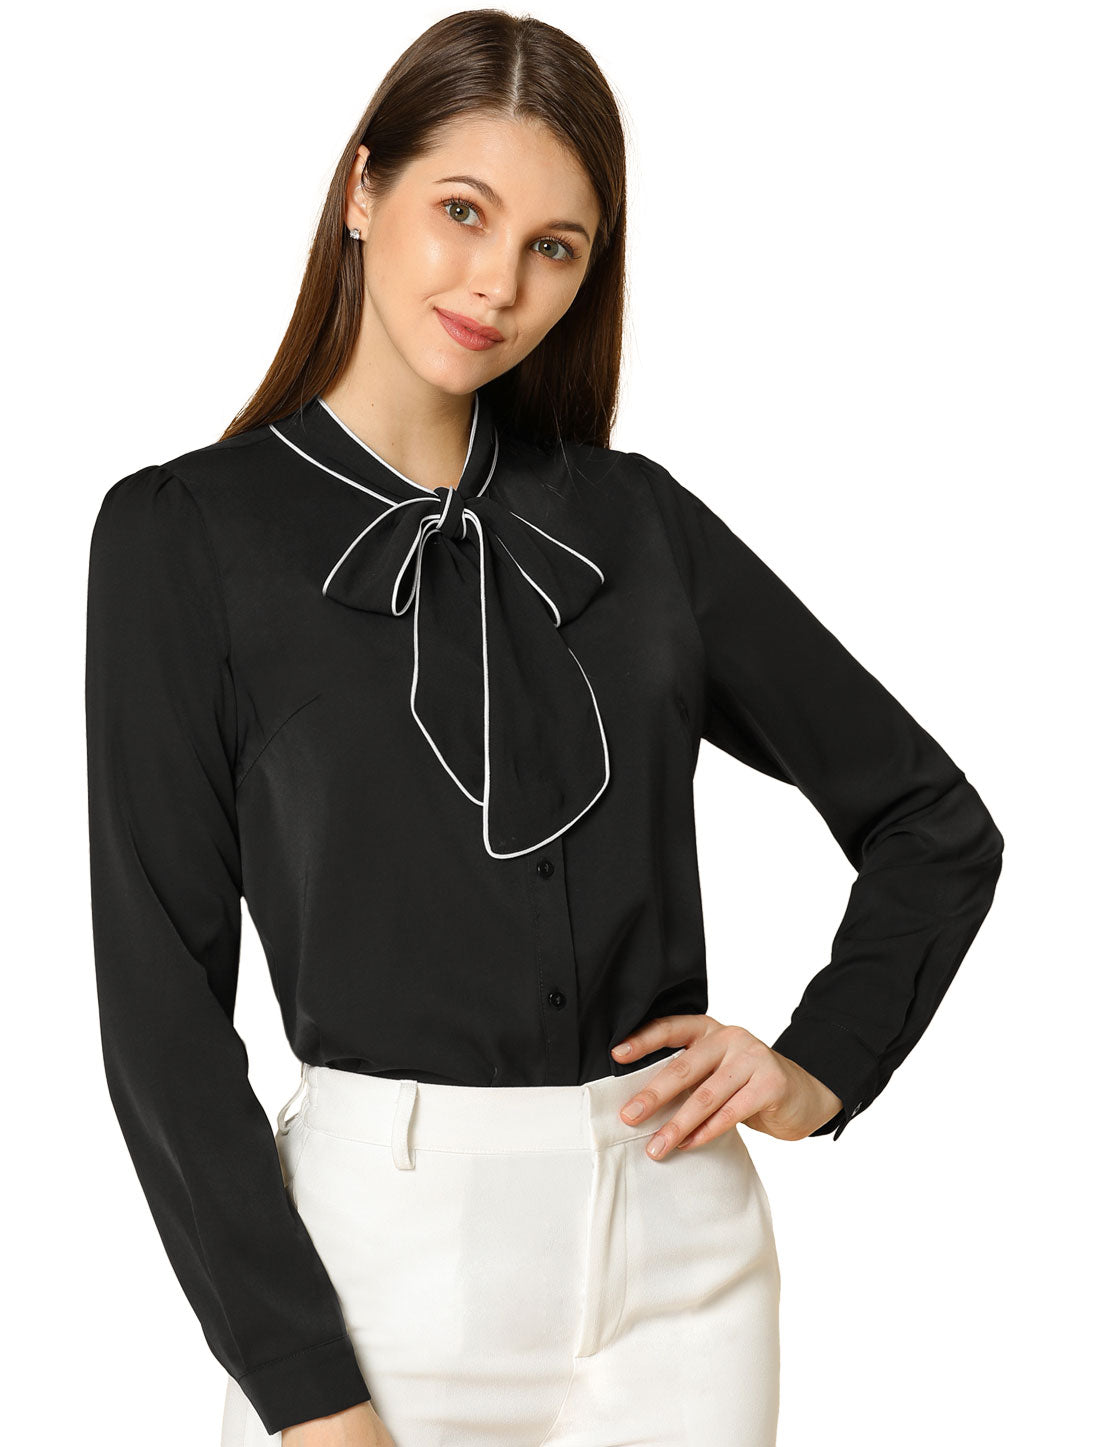 Allegra K Tie Neck Contrast Color Button Down Long Sleeve Valentine's Day Shirt